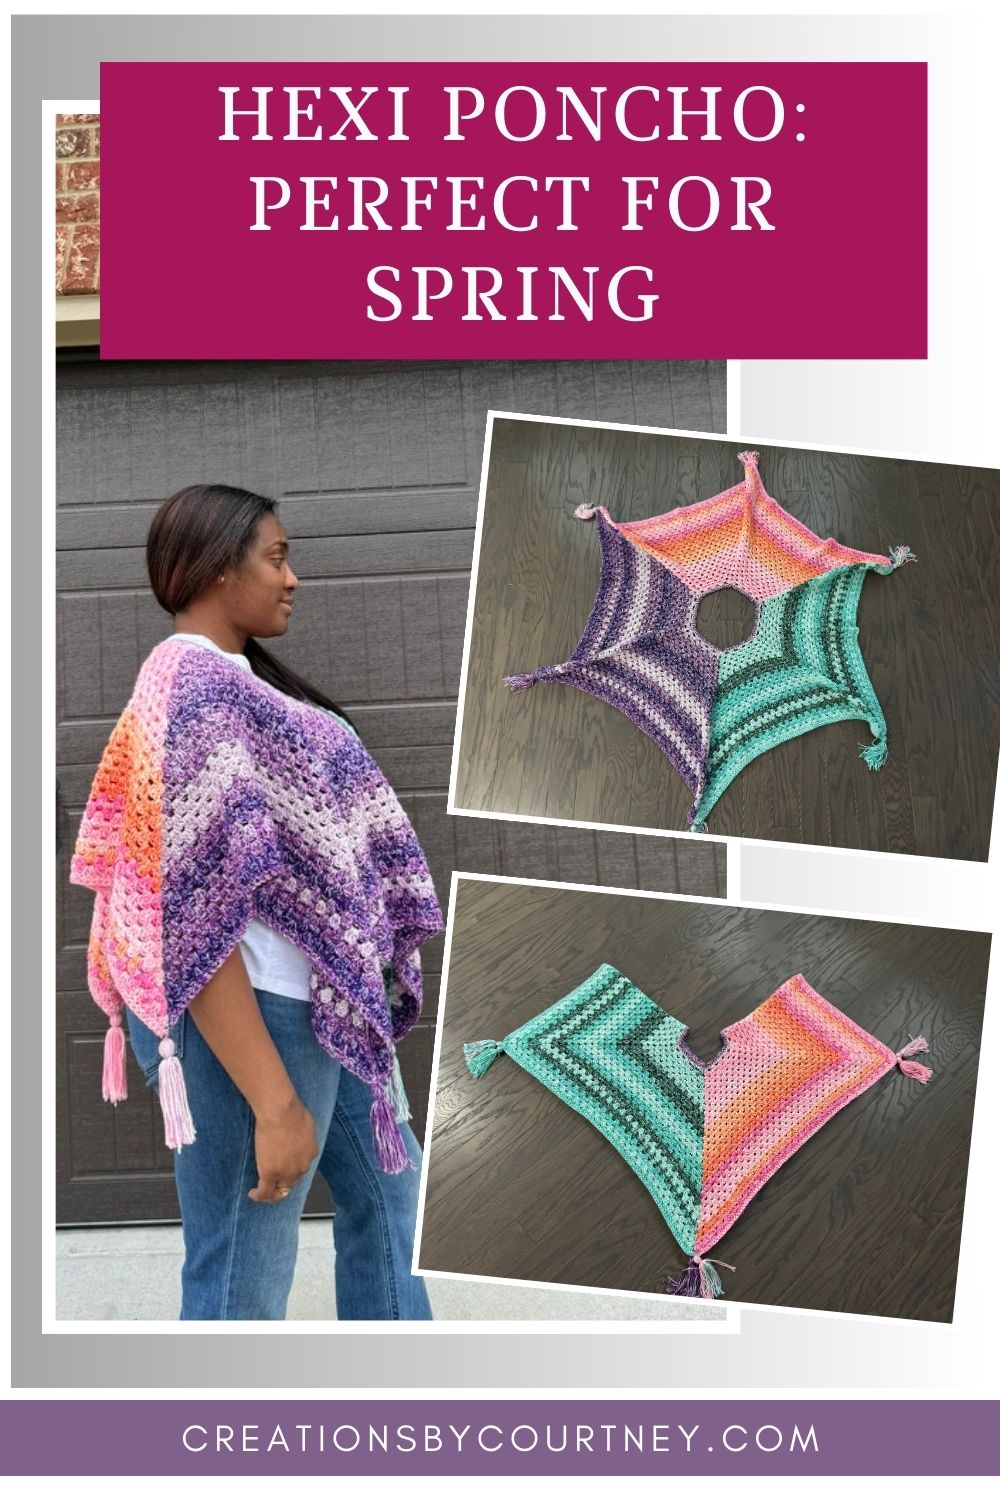 A pin of the Hexi Crochet Poncho showing a Black Woman wearing it and showing the sides that are shades of purple and pinks and orange. There are two smaller images that show the crochet poncho laid flat displaying the hexagon shape, and the other shows the poncho folded in half and showcasing two of the three colors.